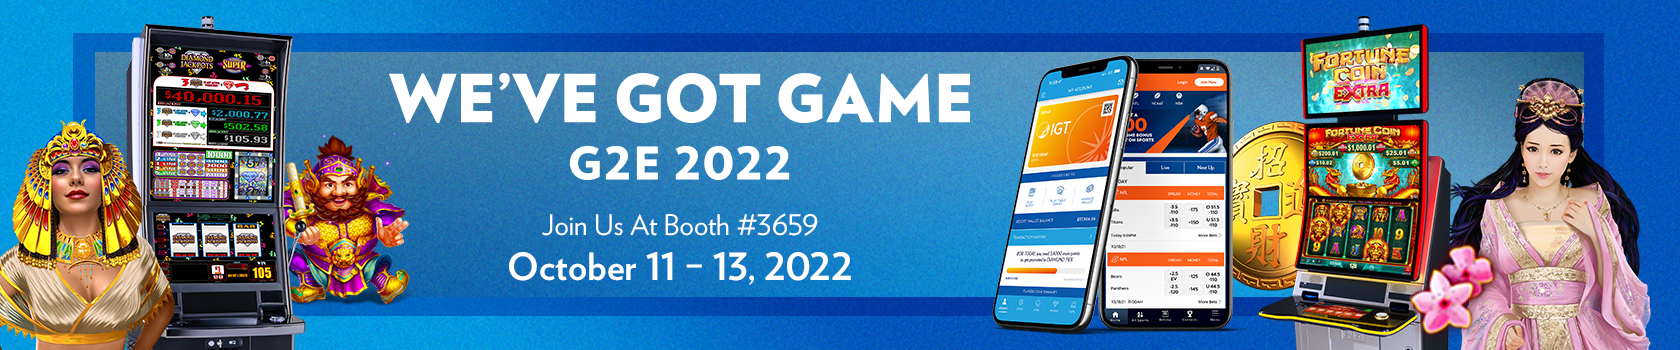 We've got game! Visit IGT at G2E 2022 – October 11-13th at The Venetian Expo in Las Vegas